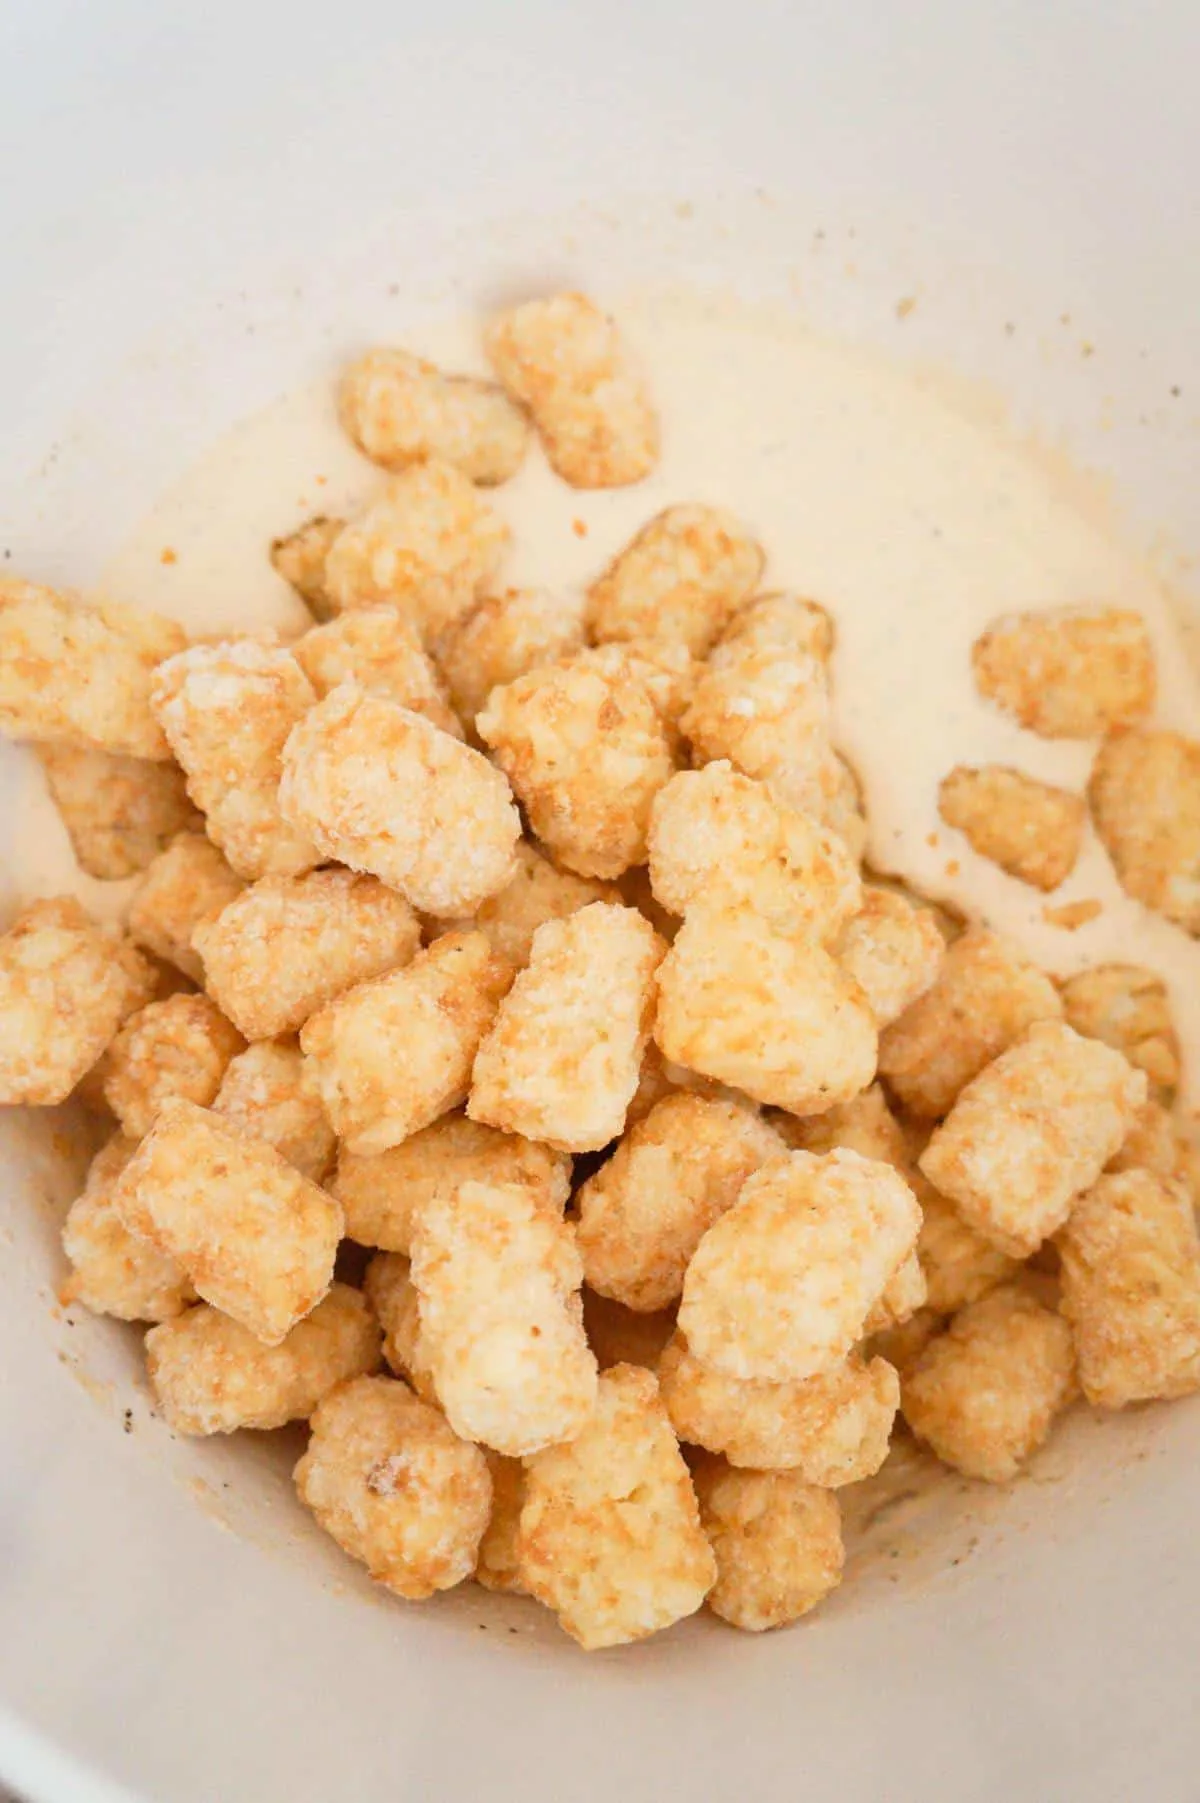 frozen tater tots in a mixing bowl with a creamy sauce